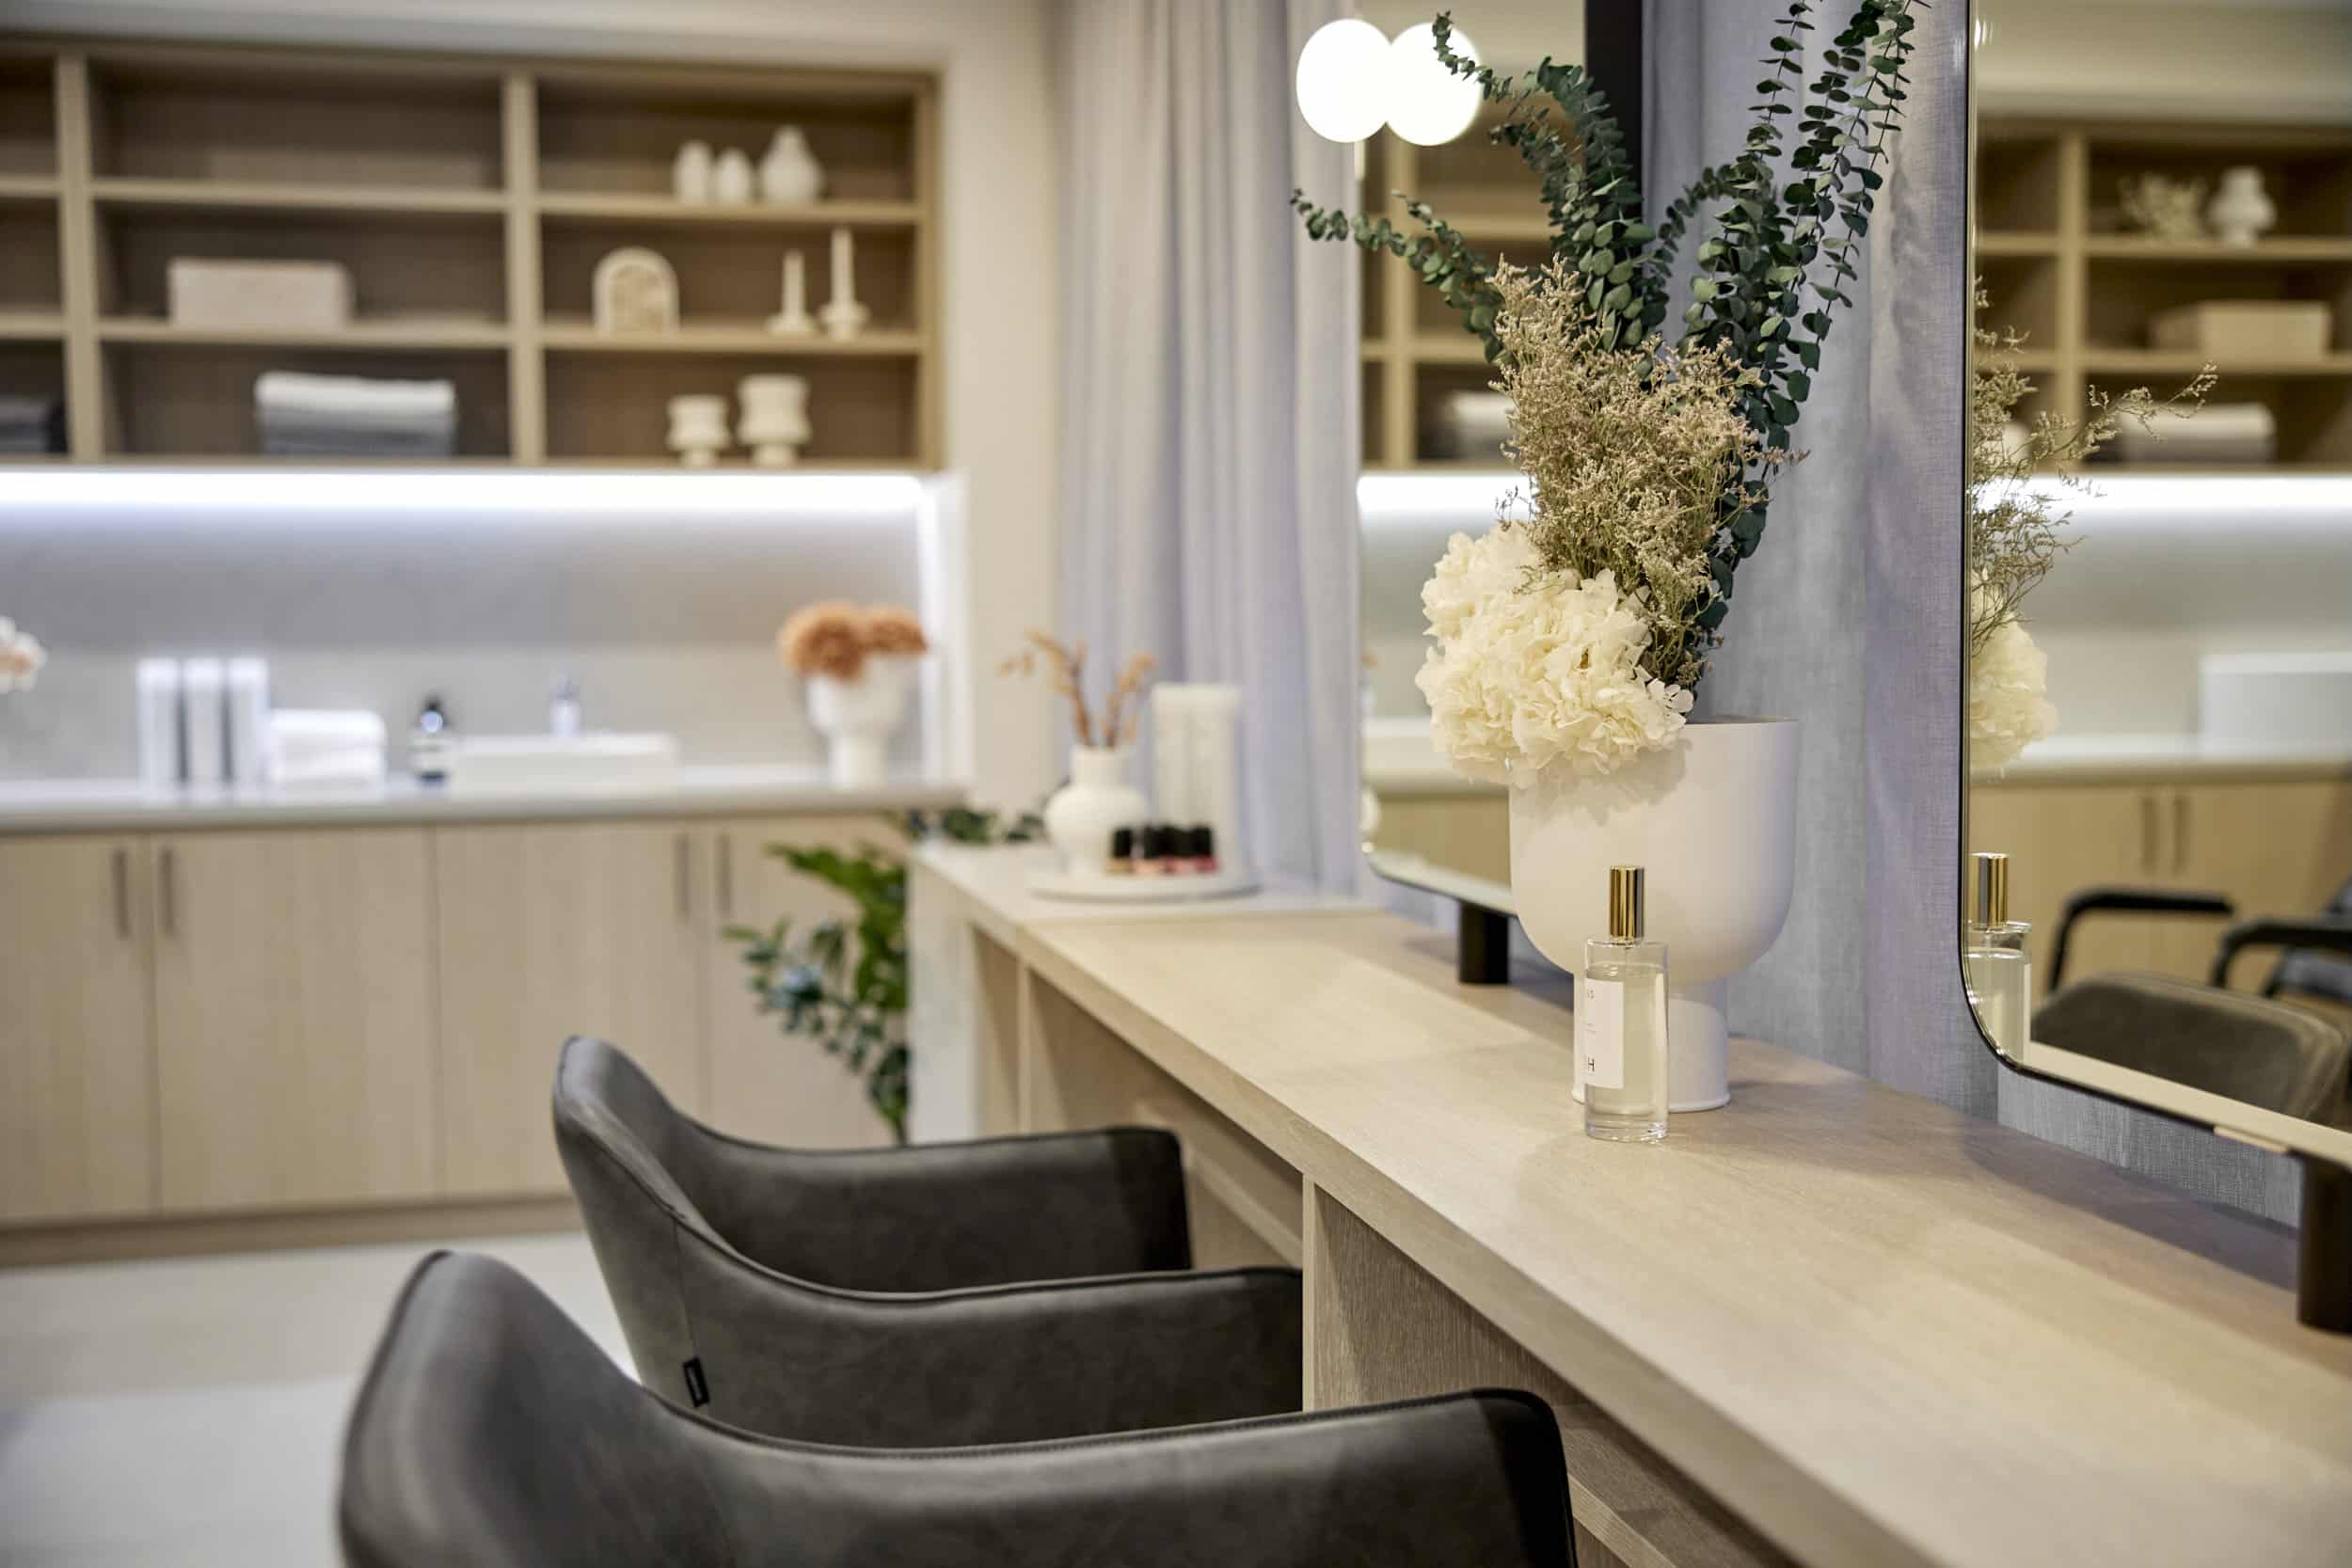 The hair and beauty salon located in our Wellbeing Studio means you don't need to travel far for your pampering